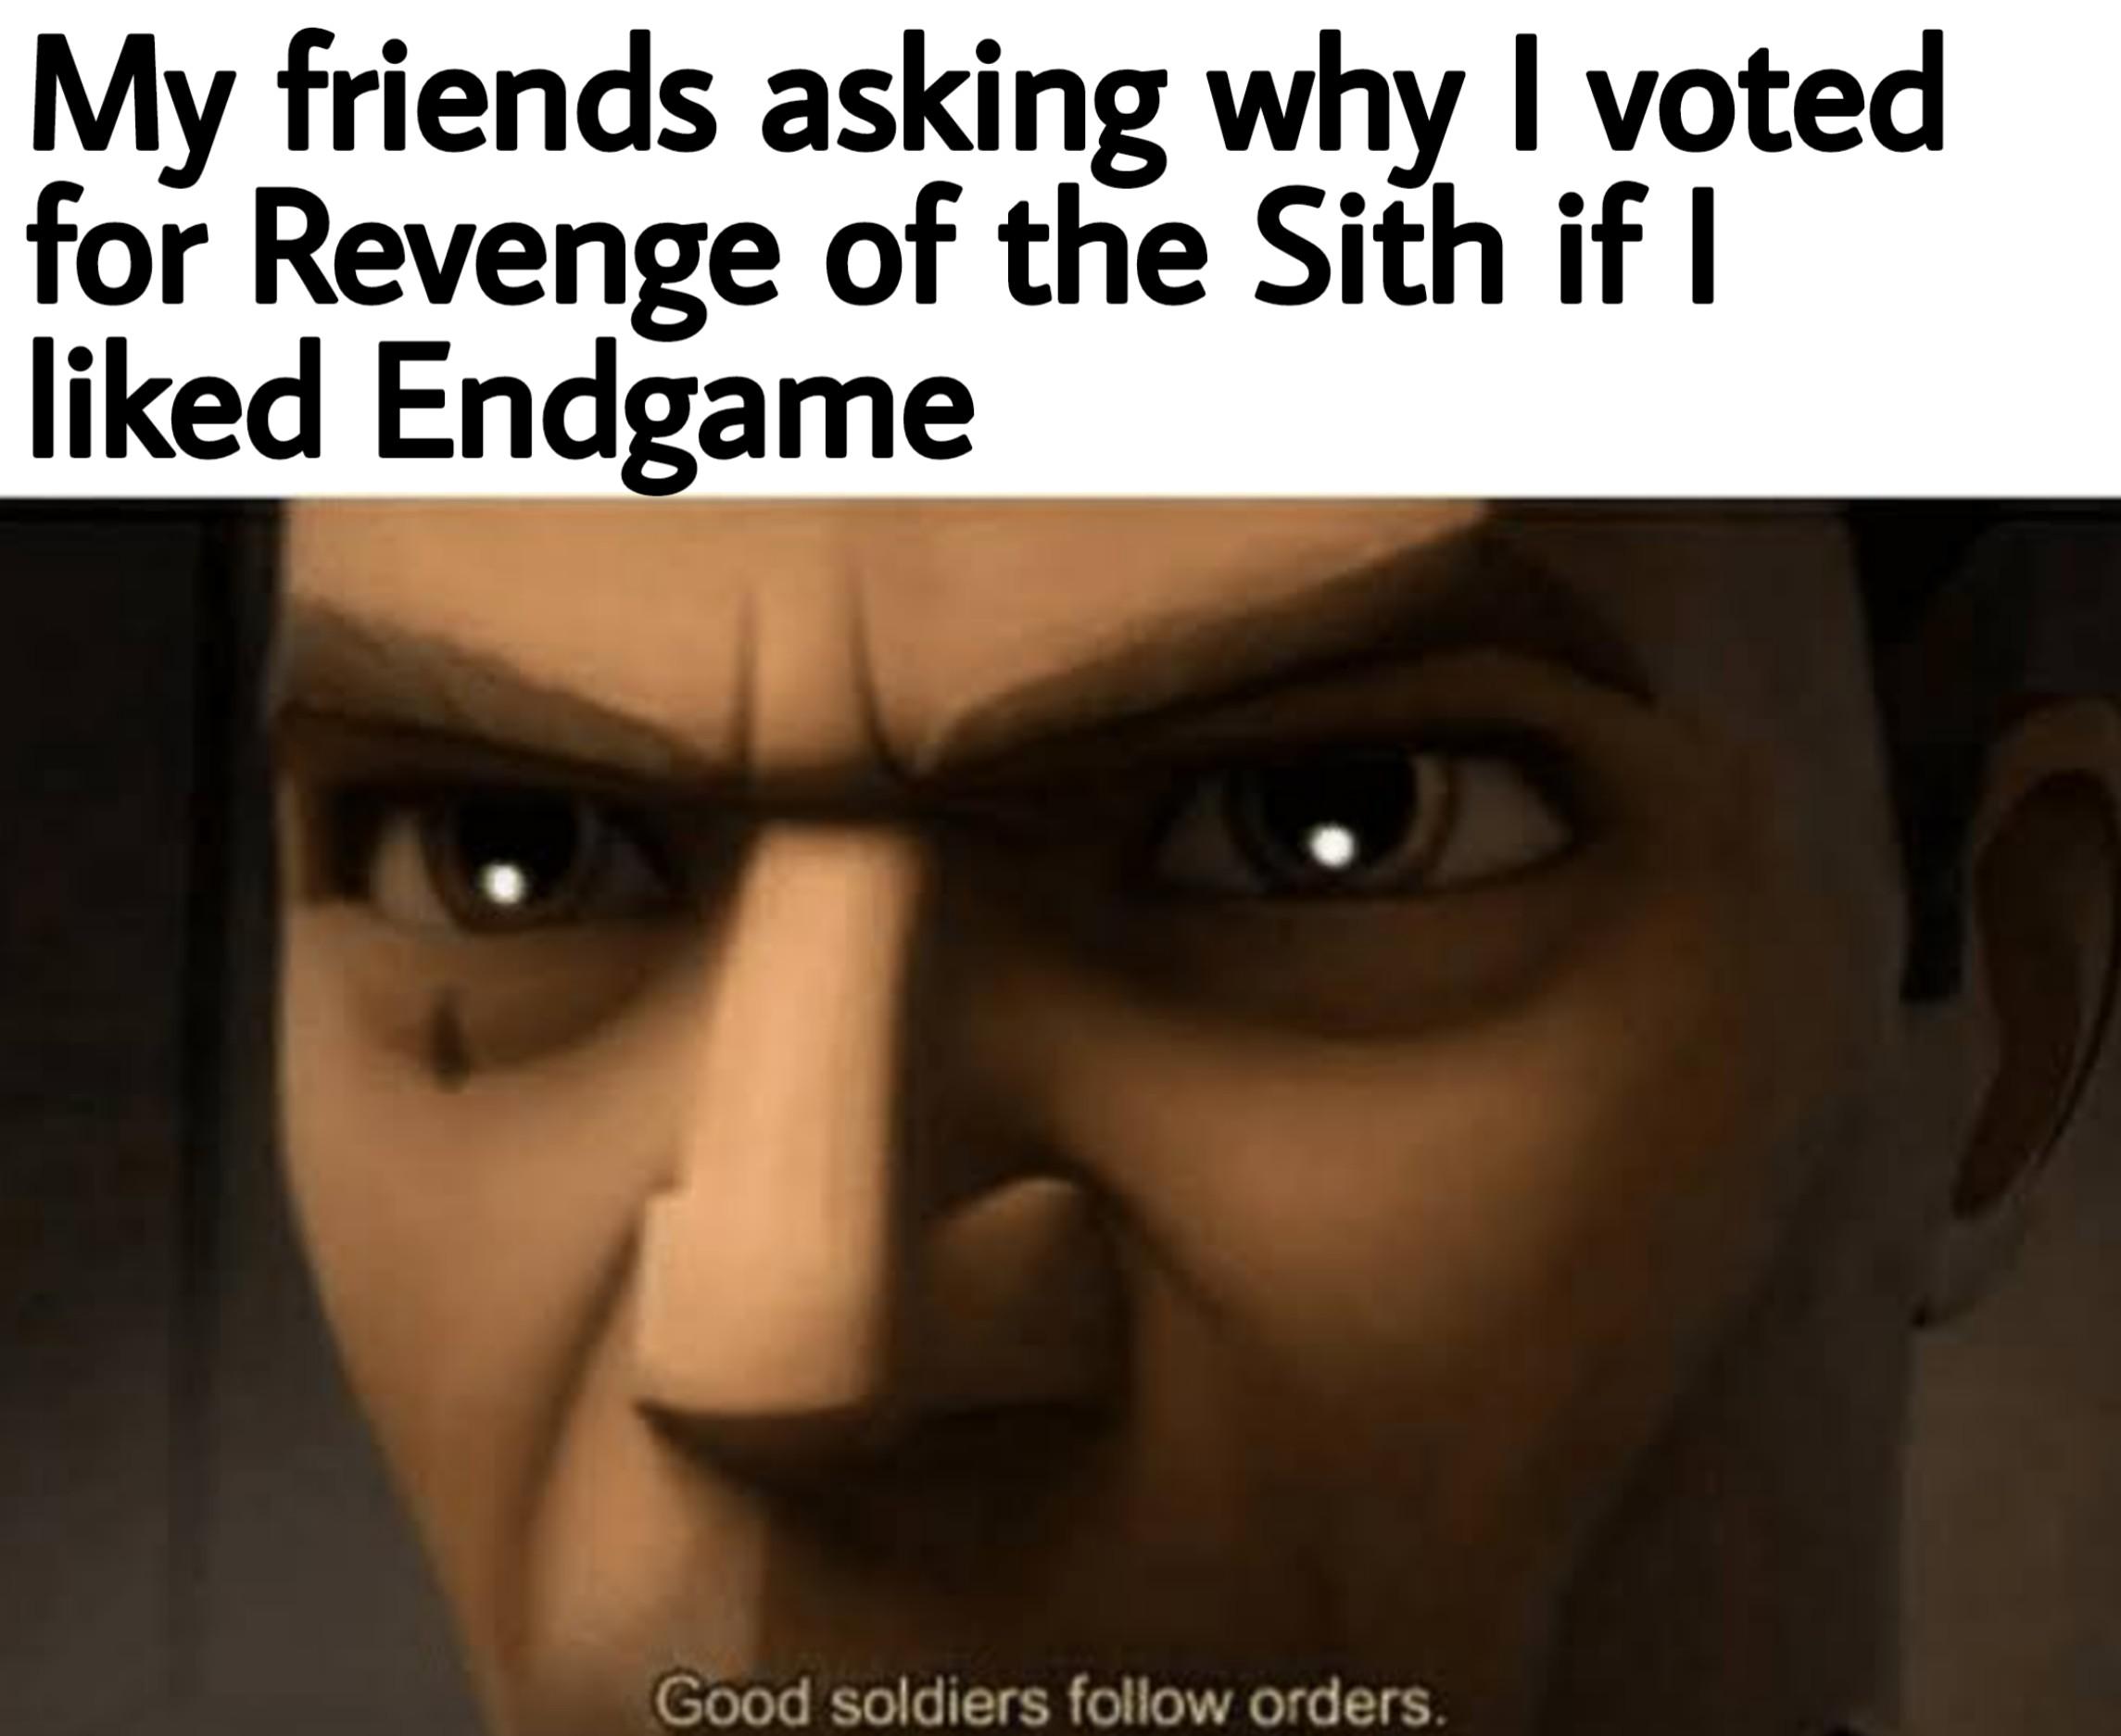 Prequel-memes, Star Wars, ROTS, Endgame, RotS, Infinity War Star Wars Memes Prequel-memes, Star Wars, ROTS, Endgame, RotS, Infinity War text: My friends asking why I voted for Revenge of the Sith if I liked Endgame Gbod soldiers follow orders. 